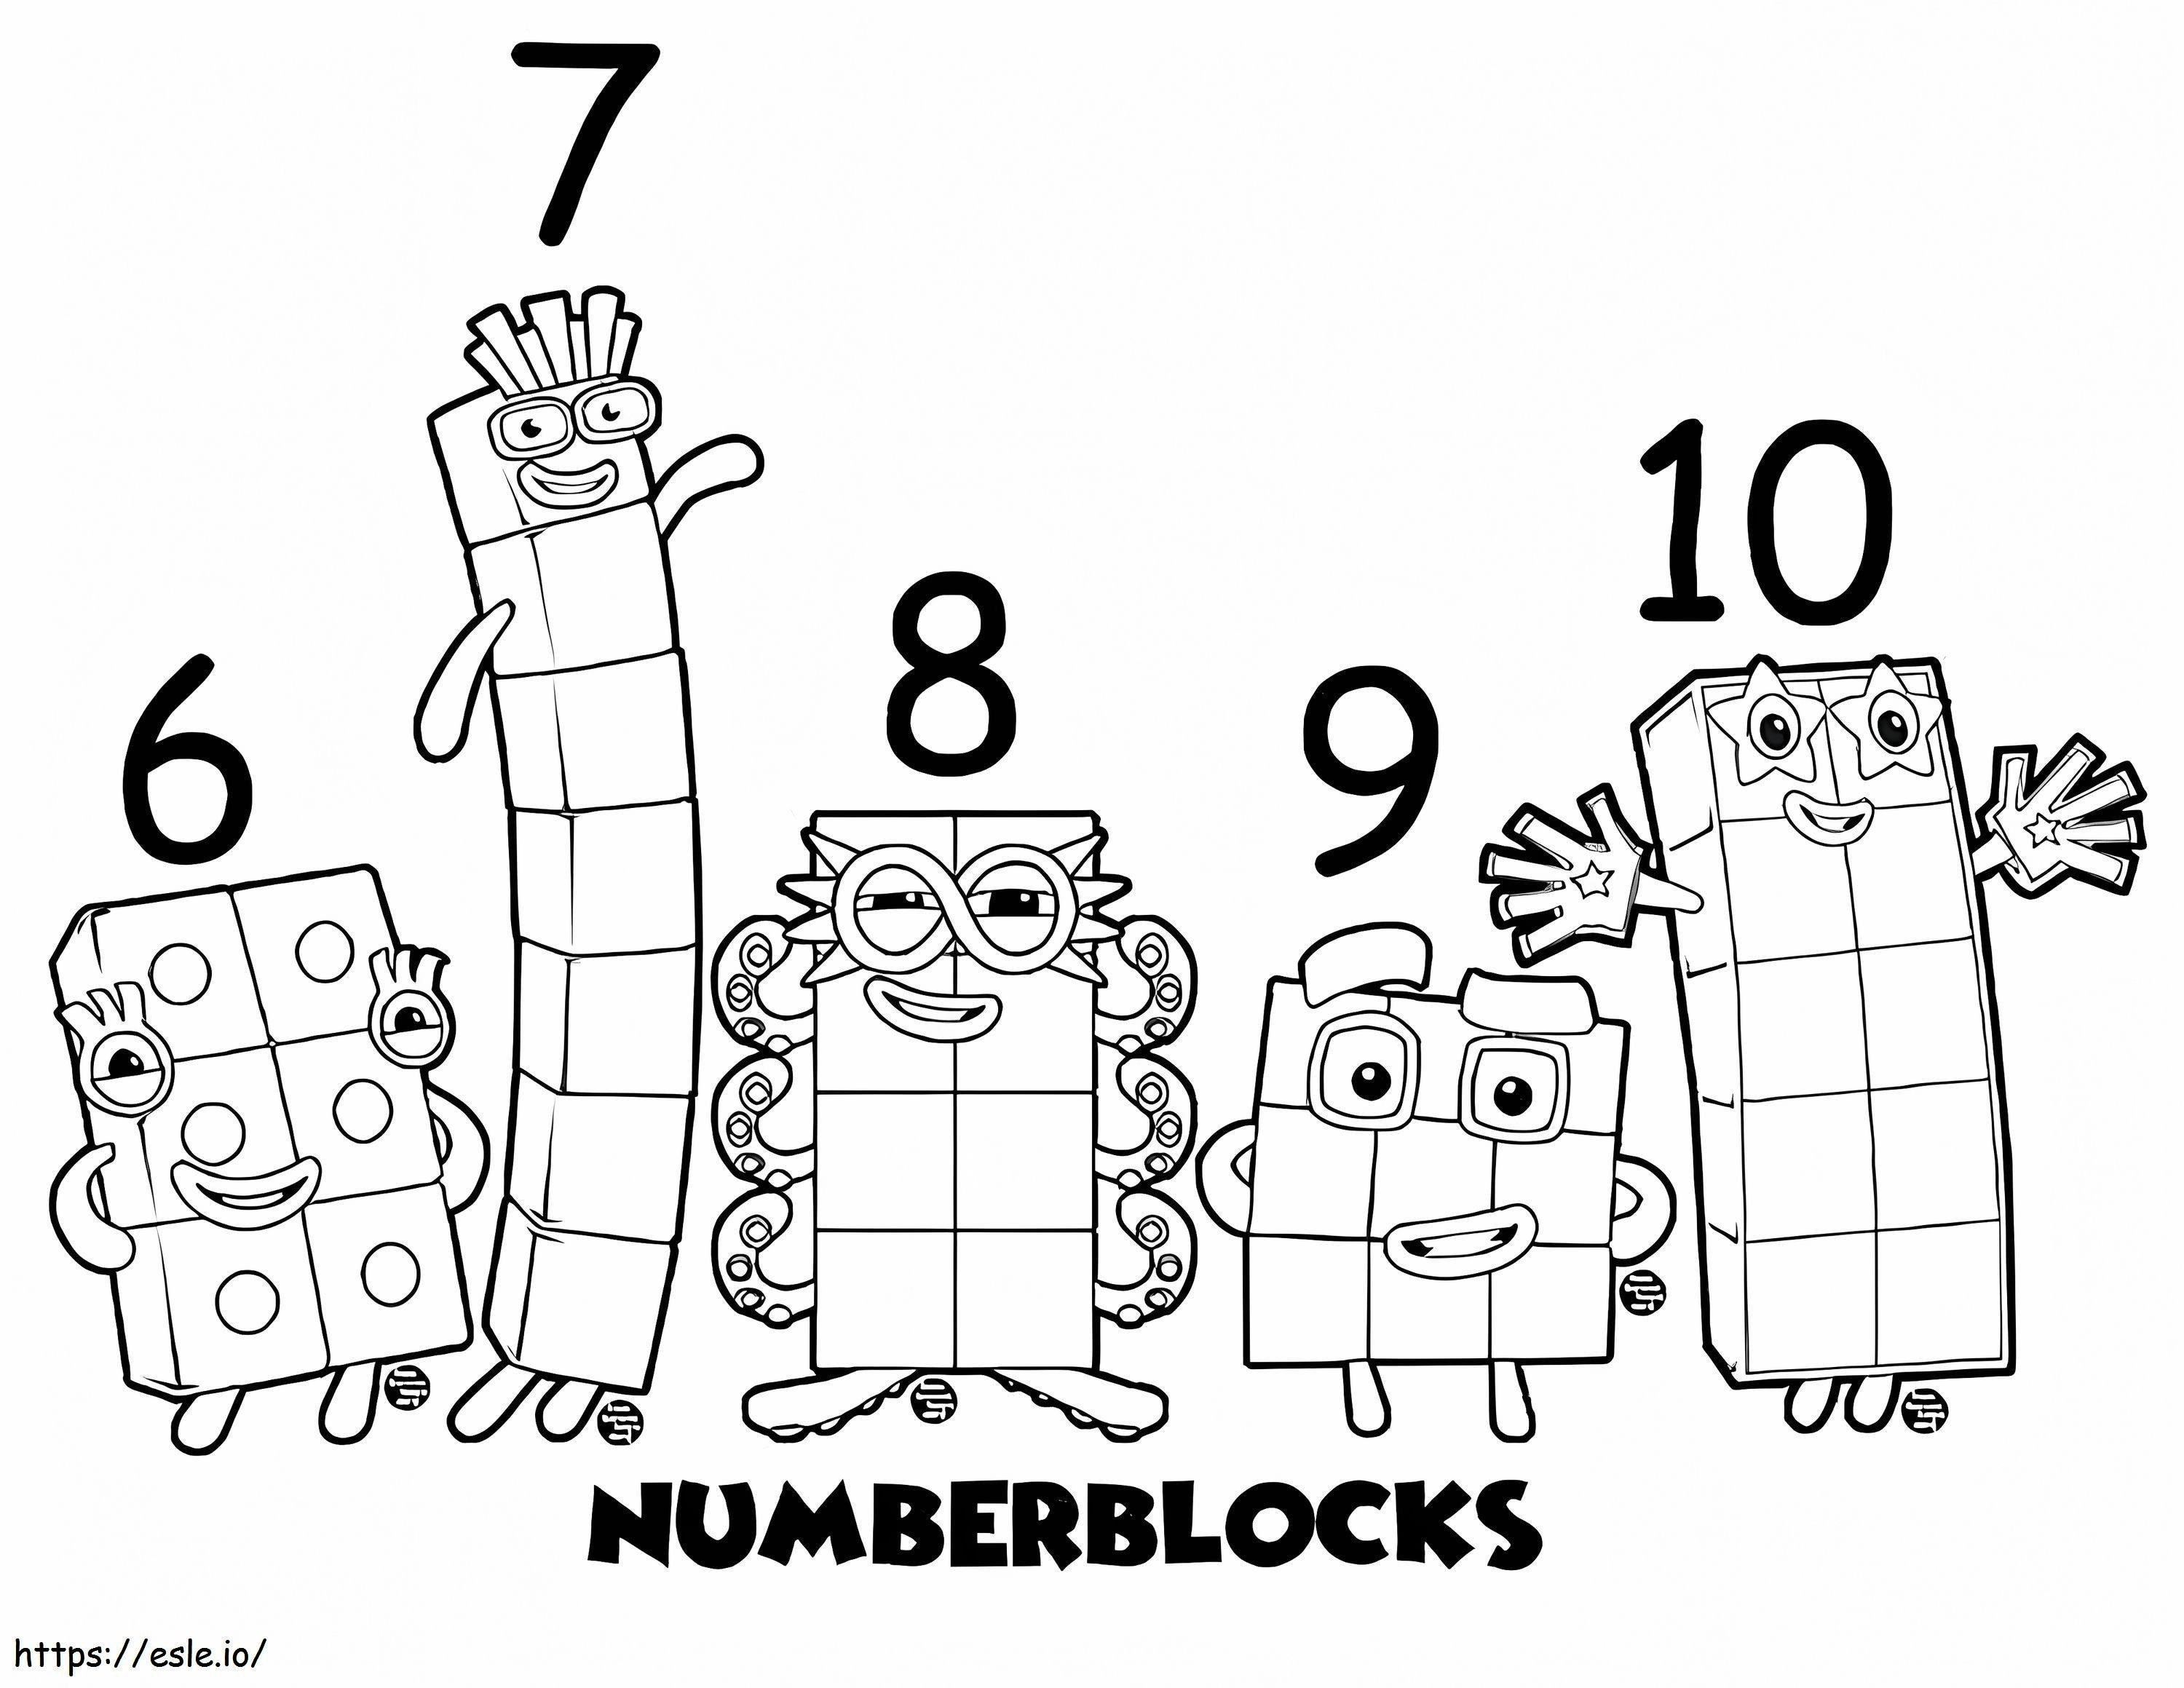 Numberblocks From 6 To 10 coloring page